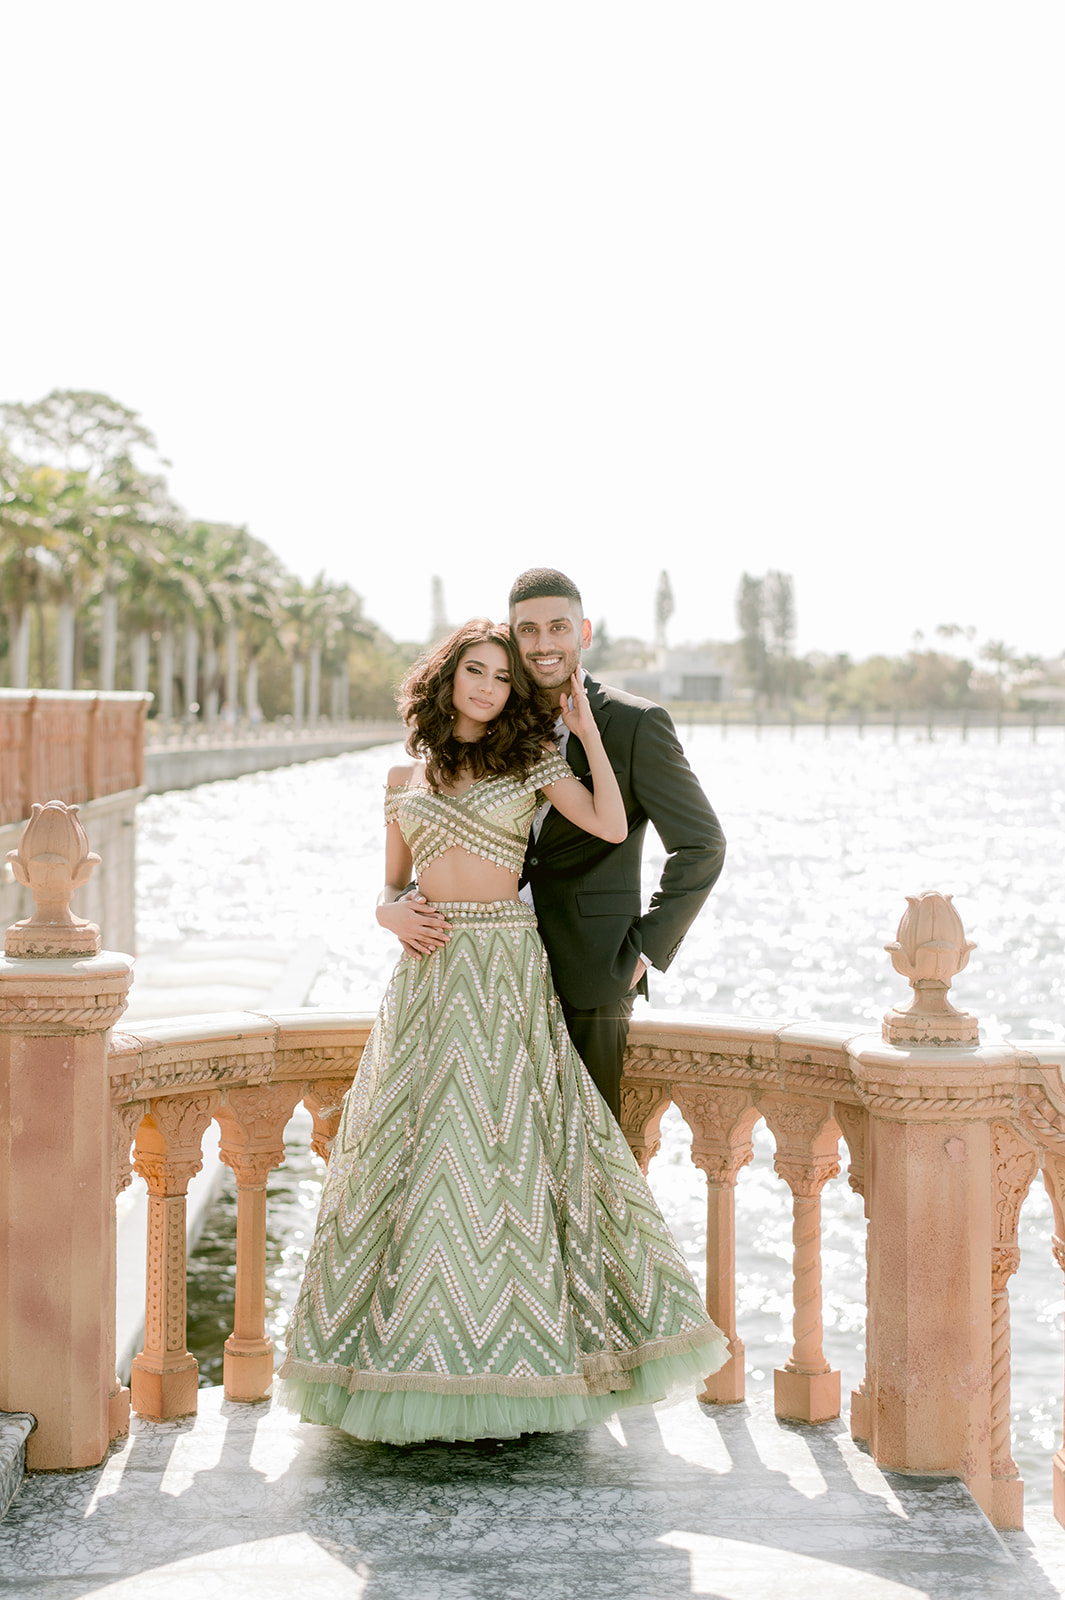 "Ringling Museum engagement shoot with Indian couple captures the magic of love and stunning location"
